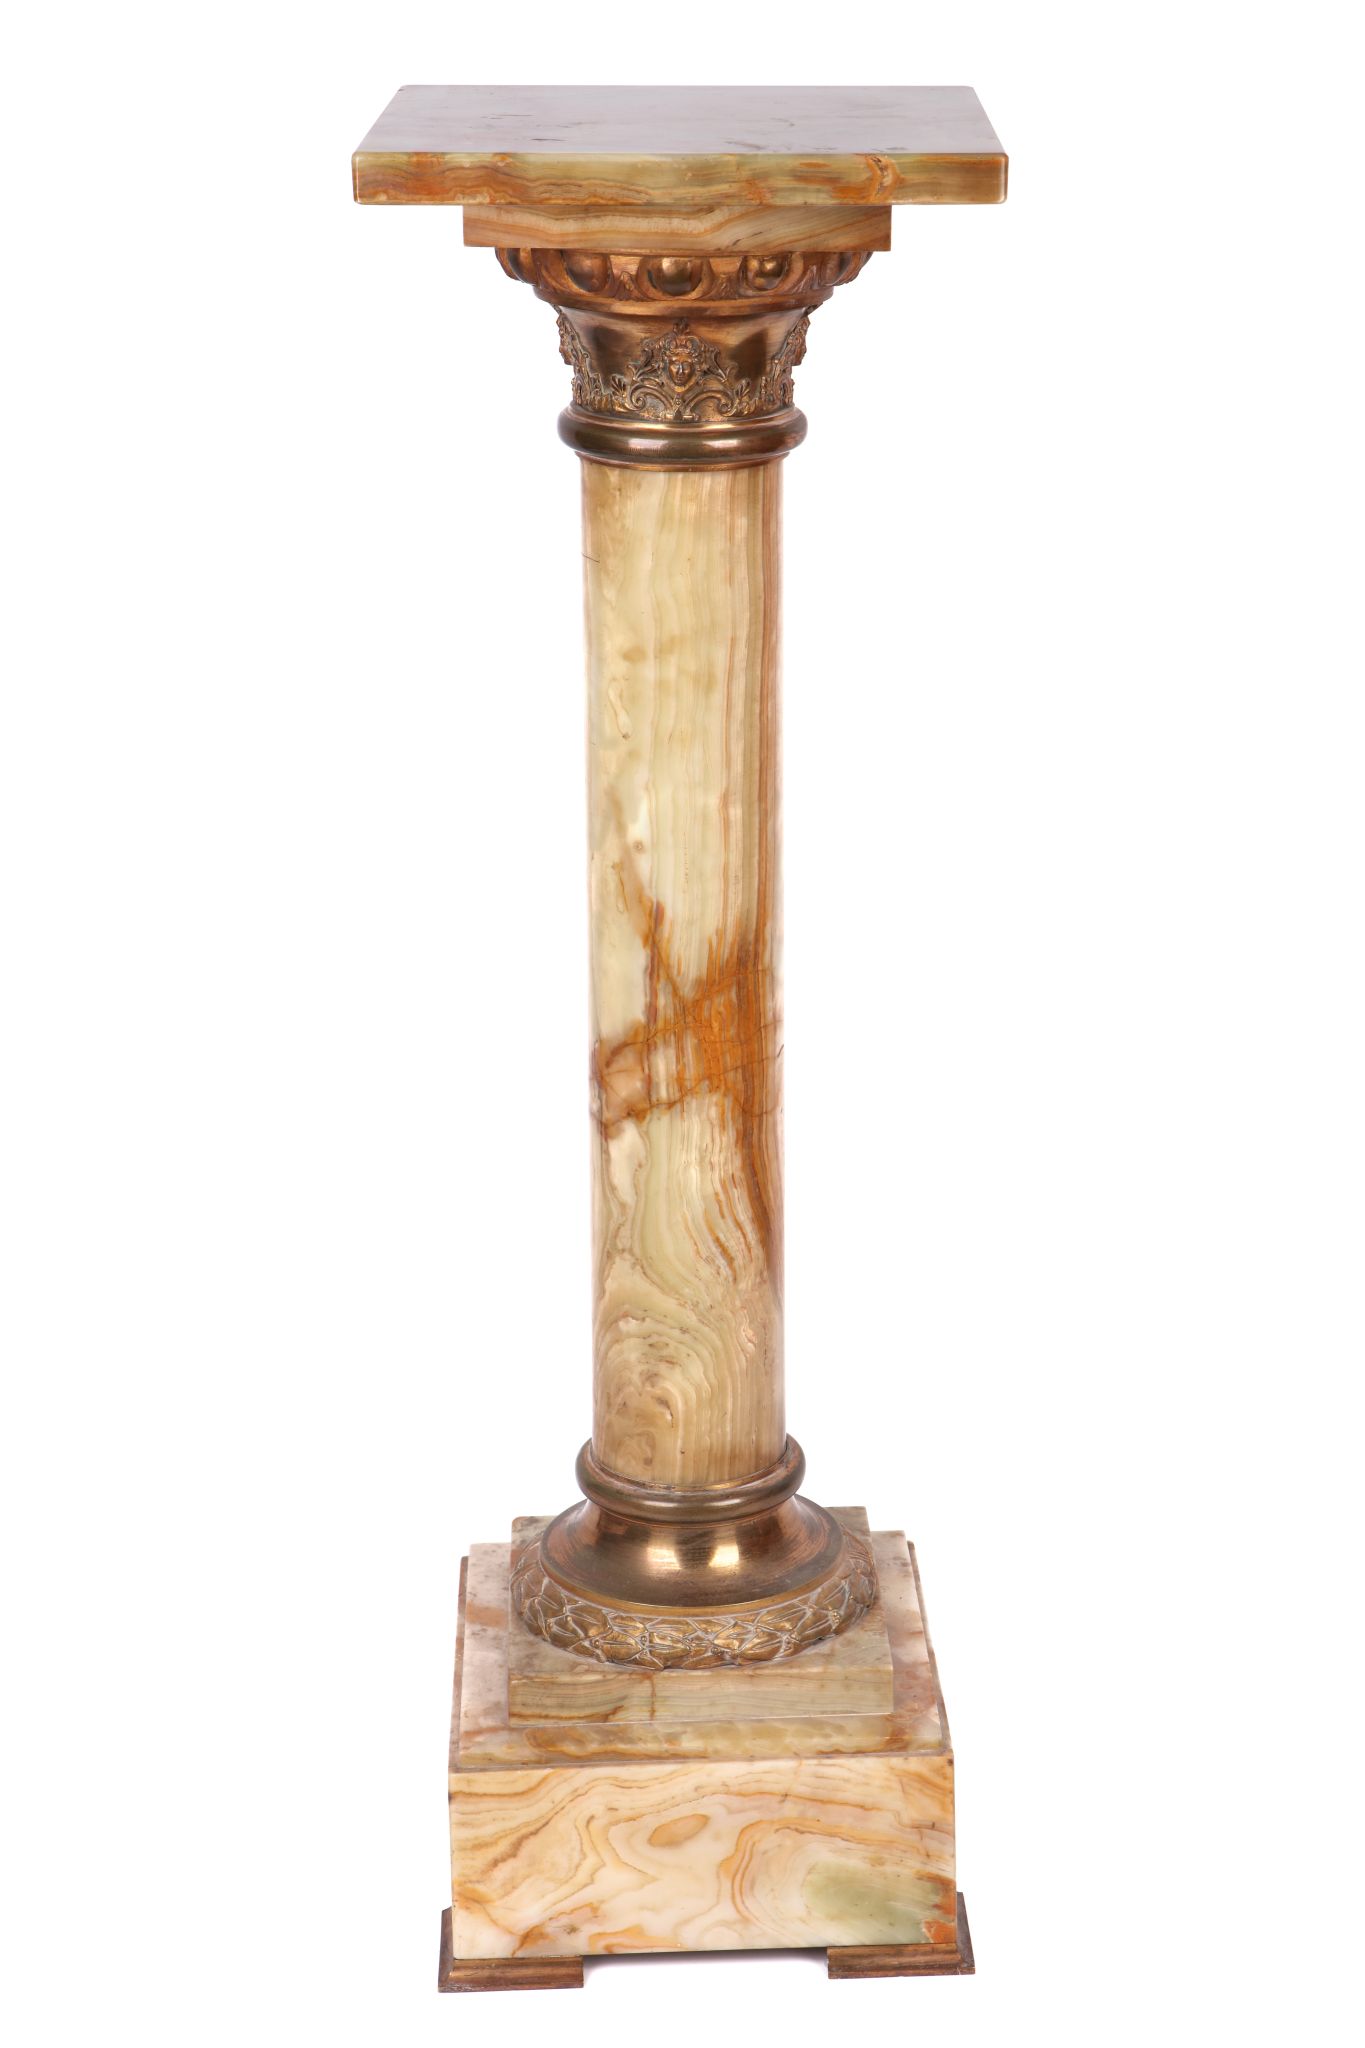 A LATE 19TH CENTURY FRENCH ONYX AND GILT BRONZE MOUNTED PEDESTAL COLUMN the square shelf top over